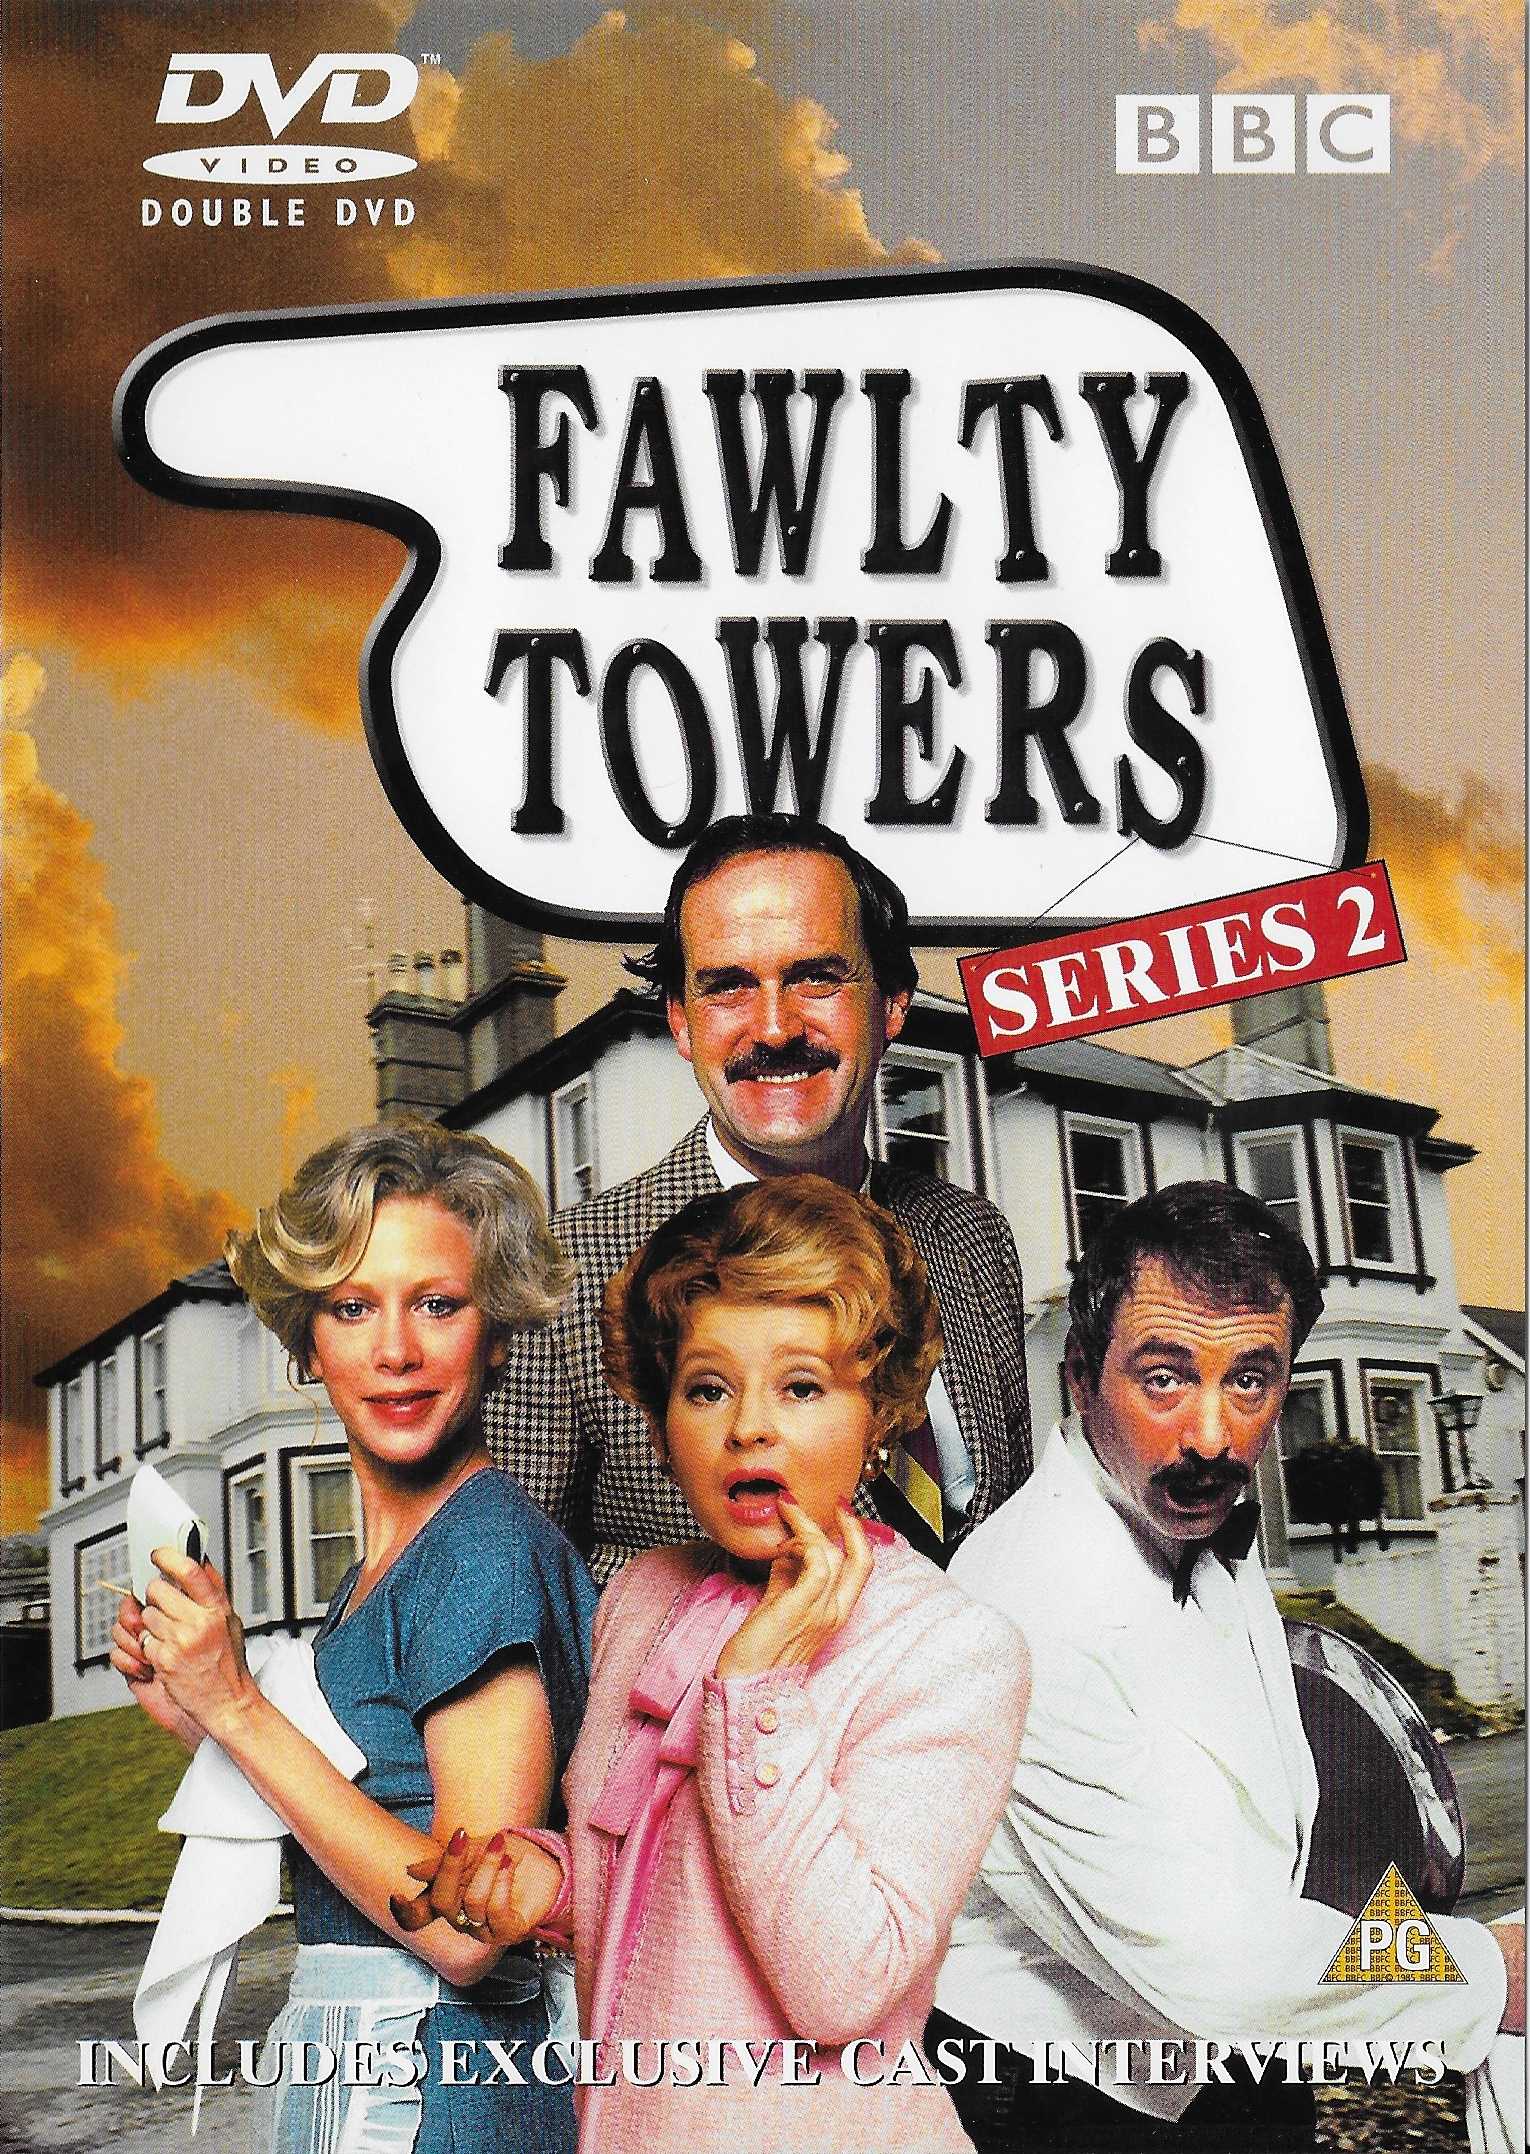 Picture of BBCDVD 1065 Fawlty Towers - Series 2 by artist John Cleese / Connie Booth from the BBC dvds - Records and Tapes library